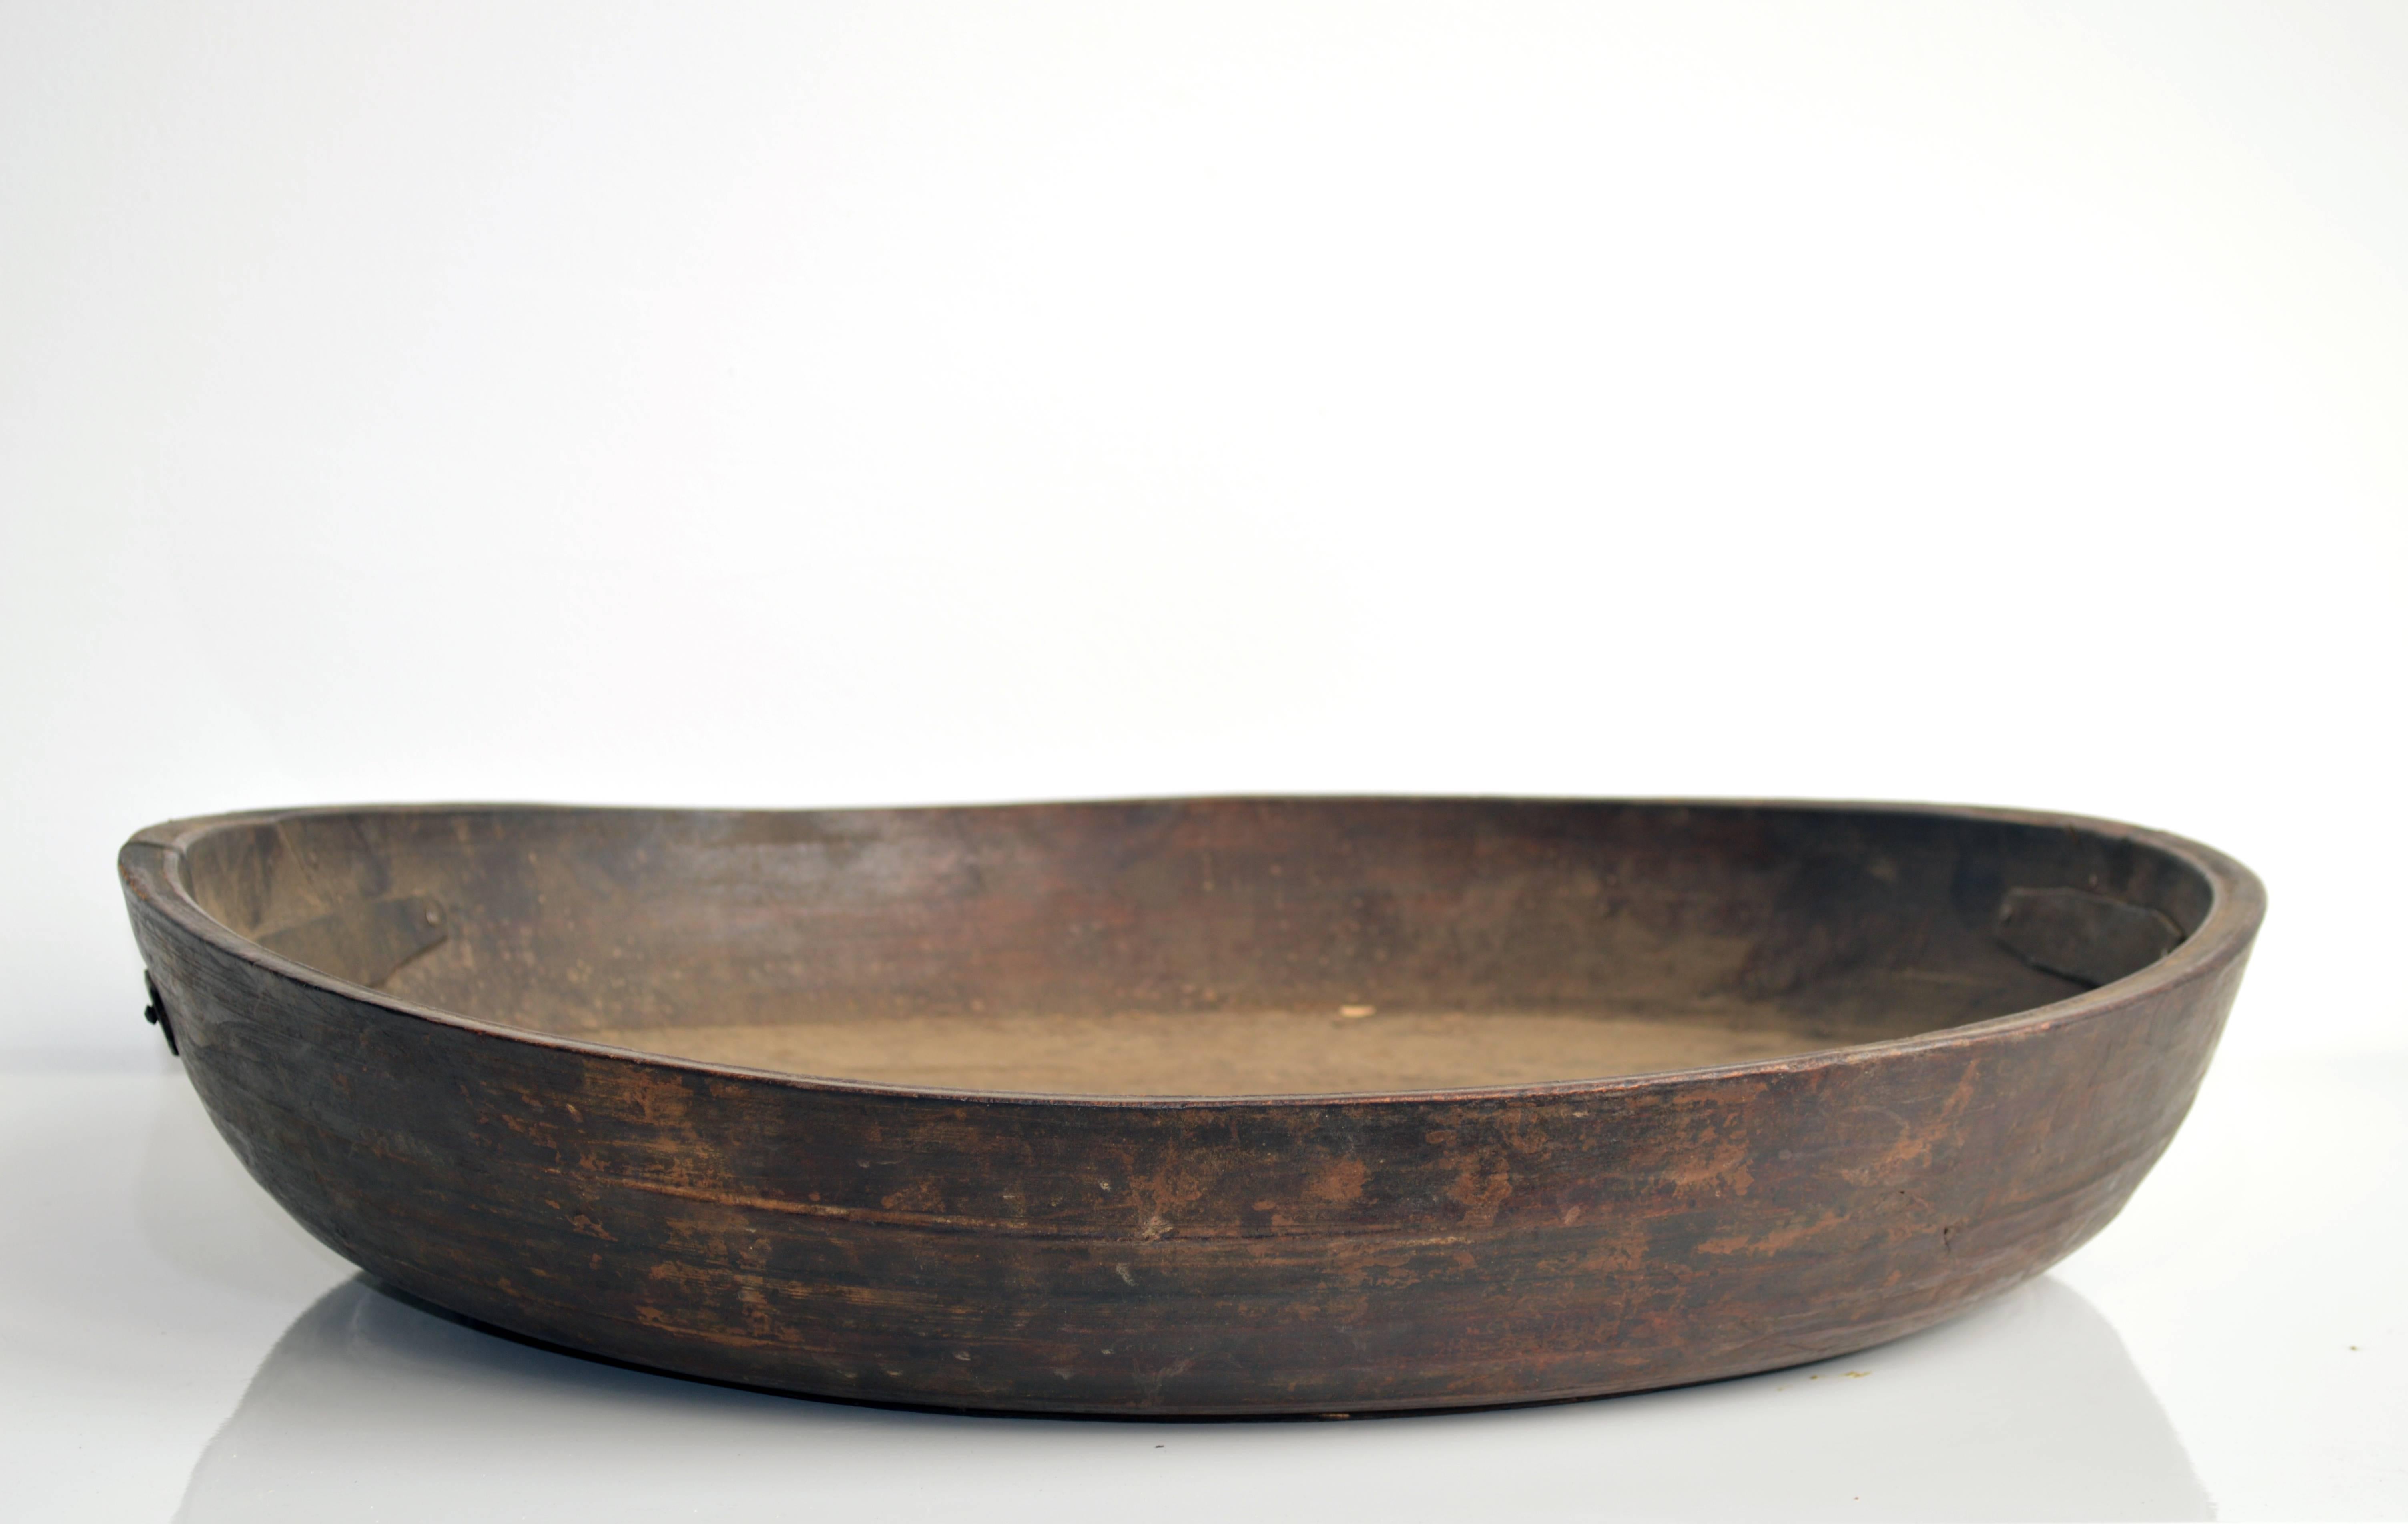 Rustic carved wood bowl, originally from Iran. This piece would make for a beautiful decorative display vessel in any home. The bowl has some cracks, secured by metal supports.

Offered by Neal Beckstedt